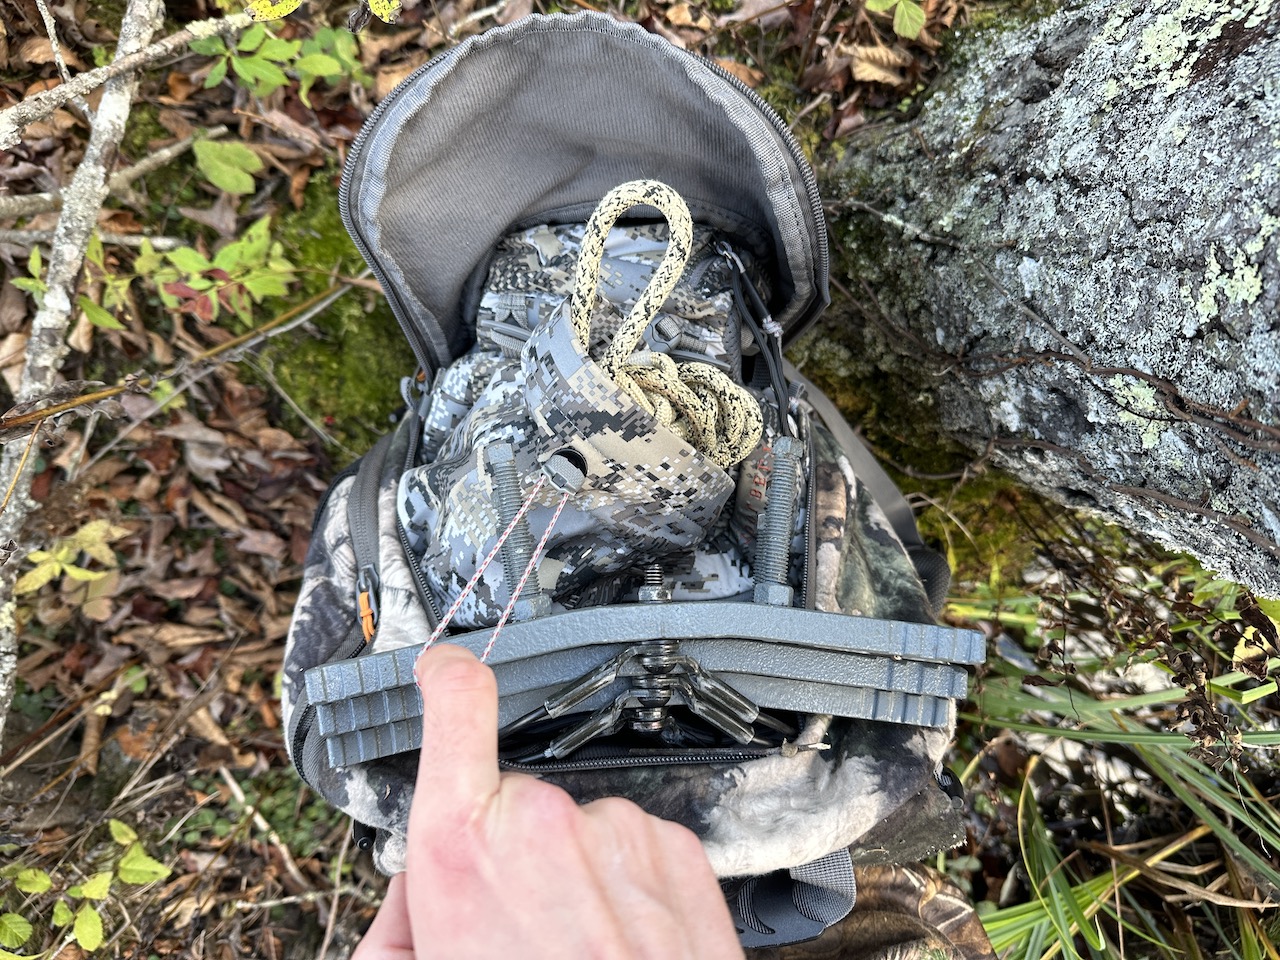 Fitting the Sitka Tool Belt into a Backpack